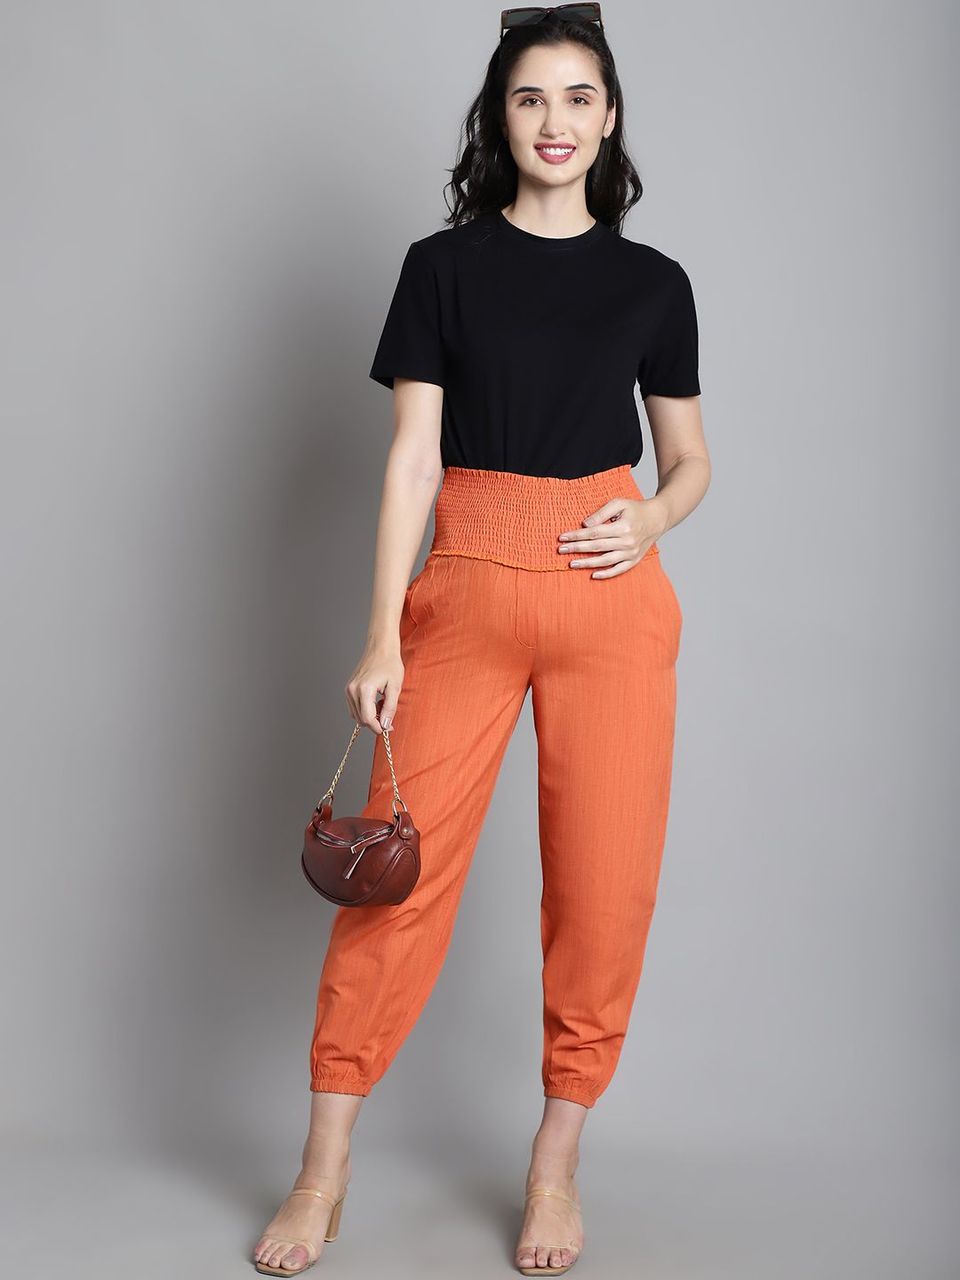 Moms Maternity Solid Orange Sustainable Cotton Ankel Length High Rise Maternity Trouser